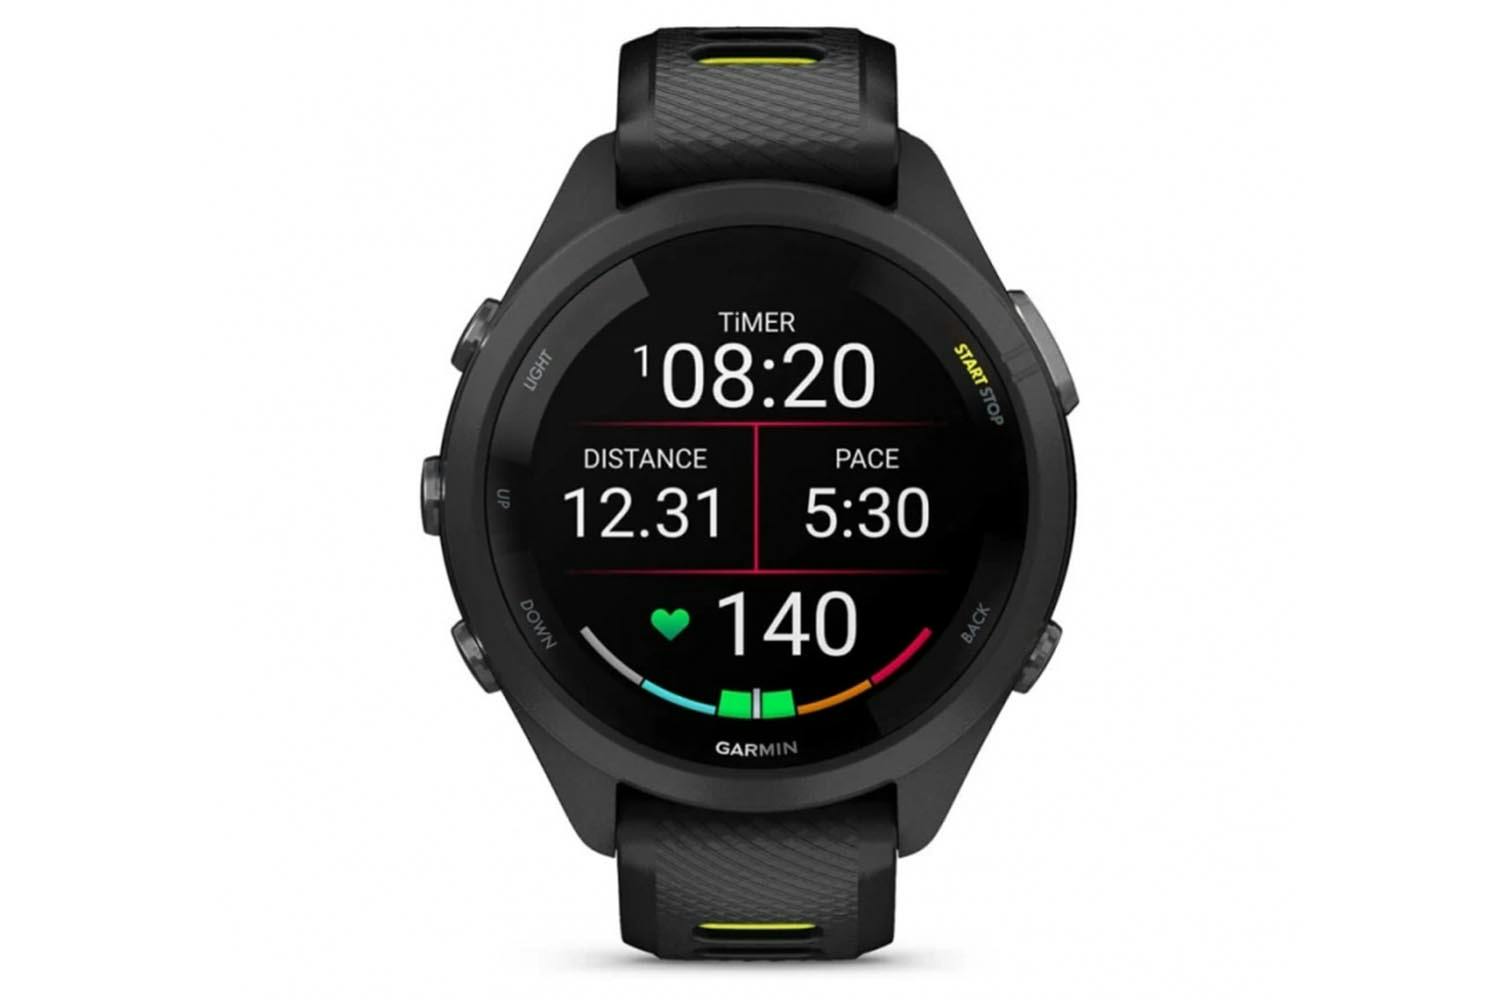 Hit your fitness goals in style with $120 off the Garmin Venu 2S smartwatch